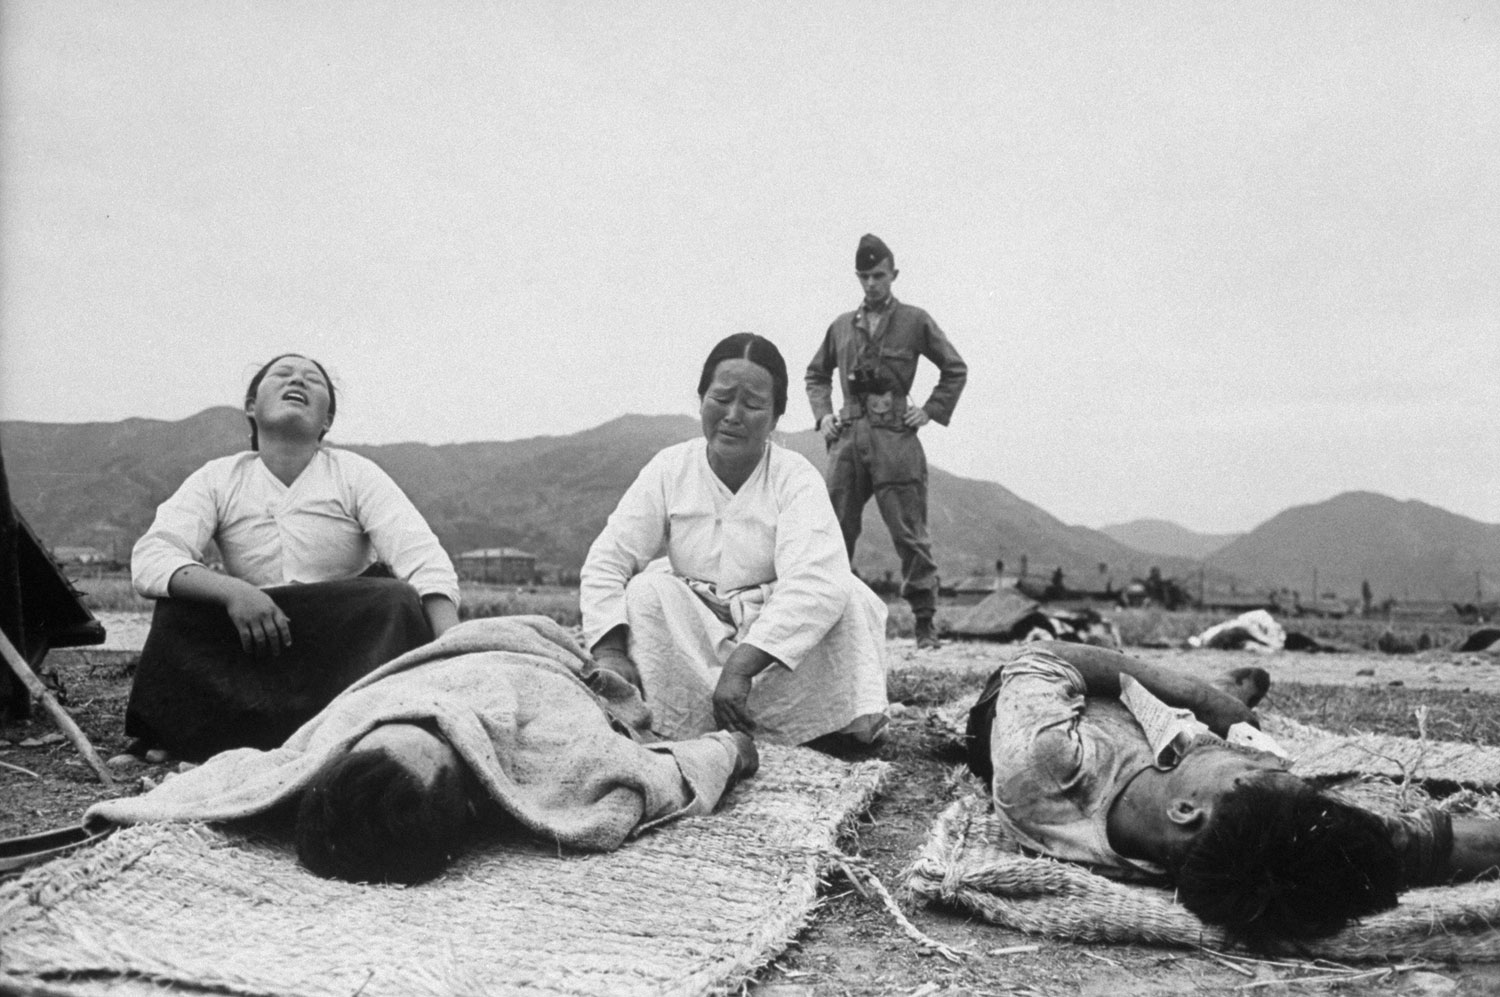 Two of Sunchon's bereaved women mourn a loyal Korean who fell before a rebel slaughter squad as the rebellion began. An American adviser, Lieut. Ralph Bliss, looks on silently where no advice will help.